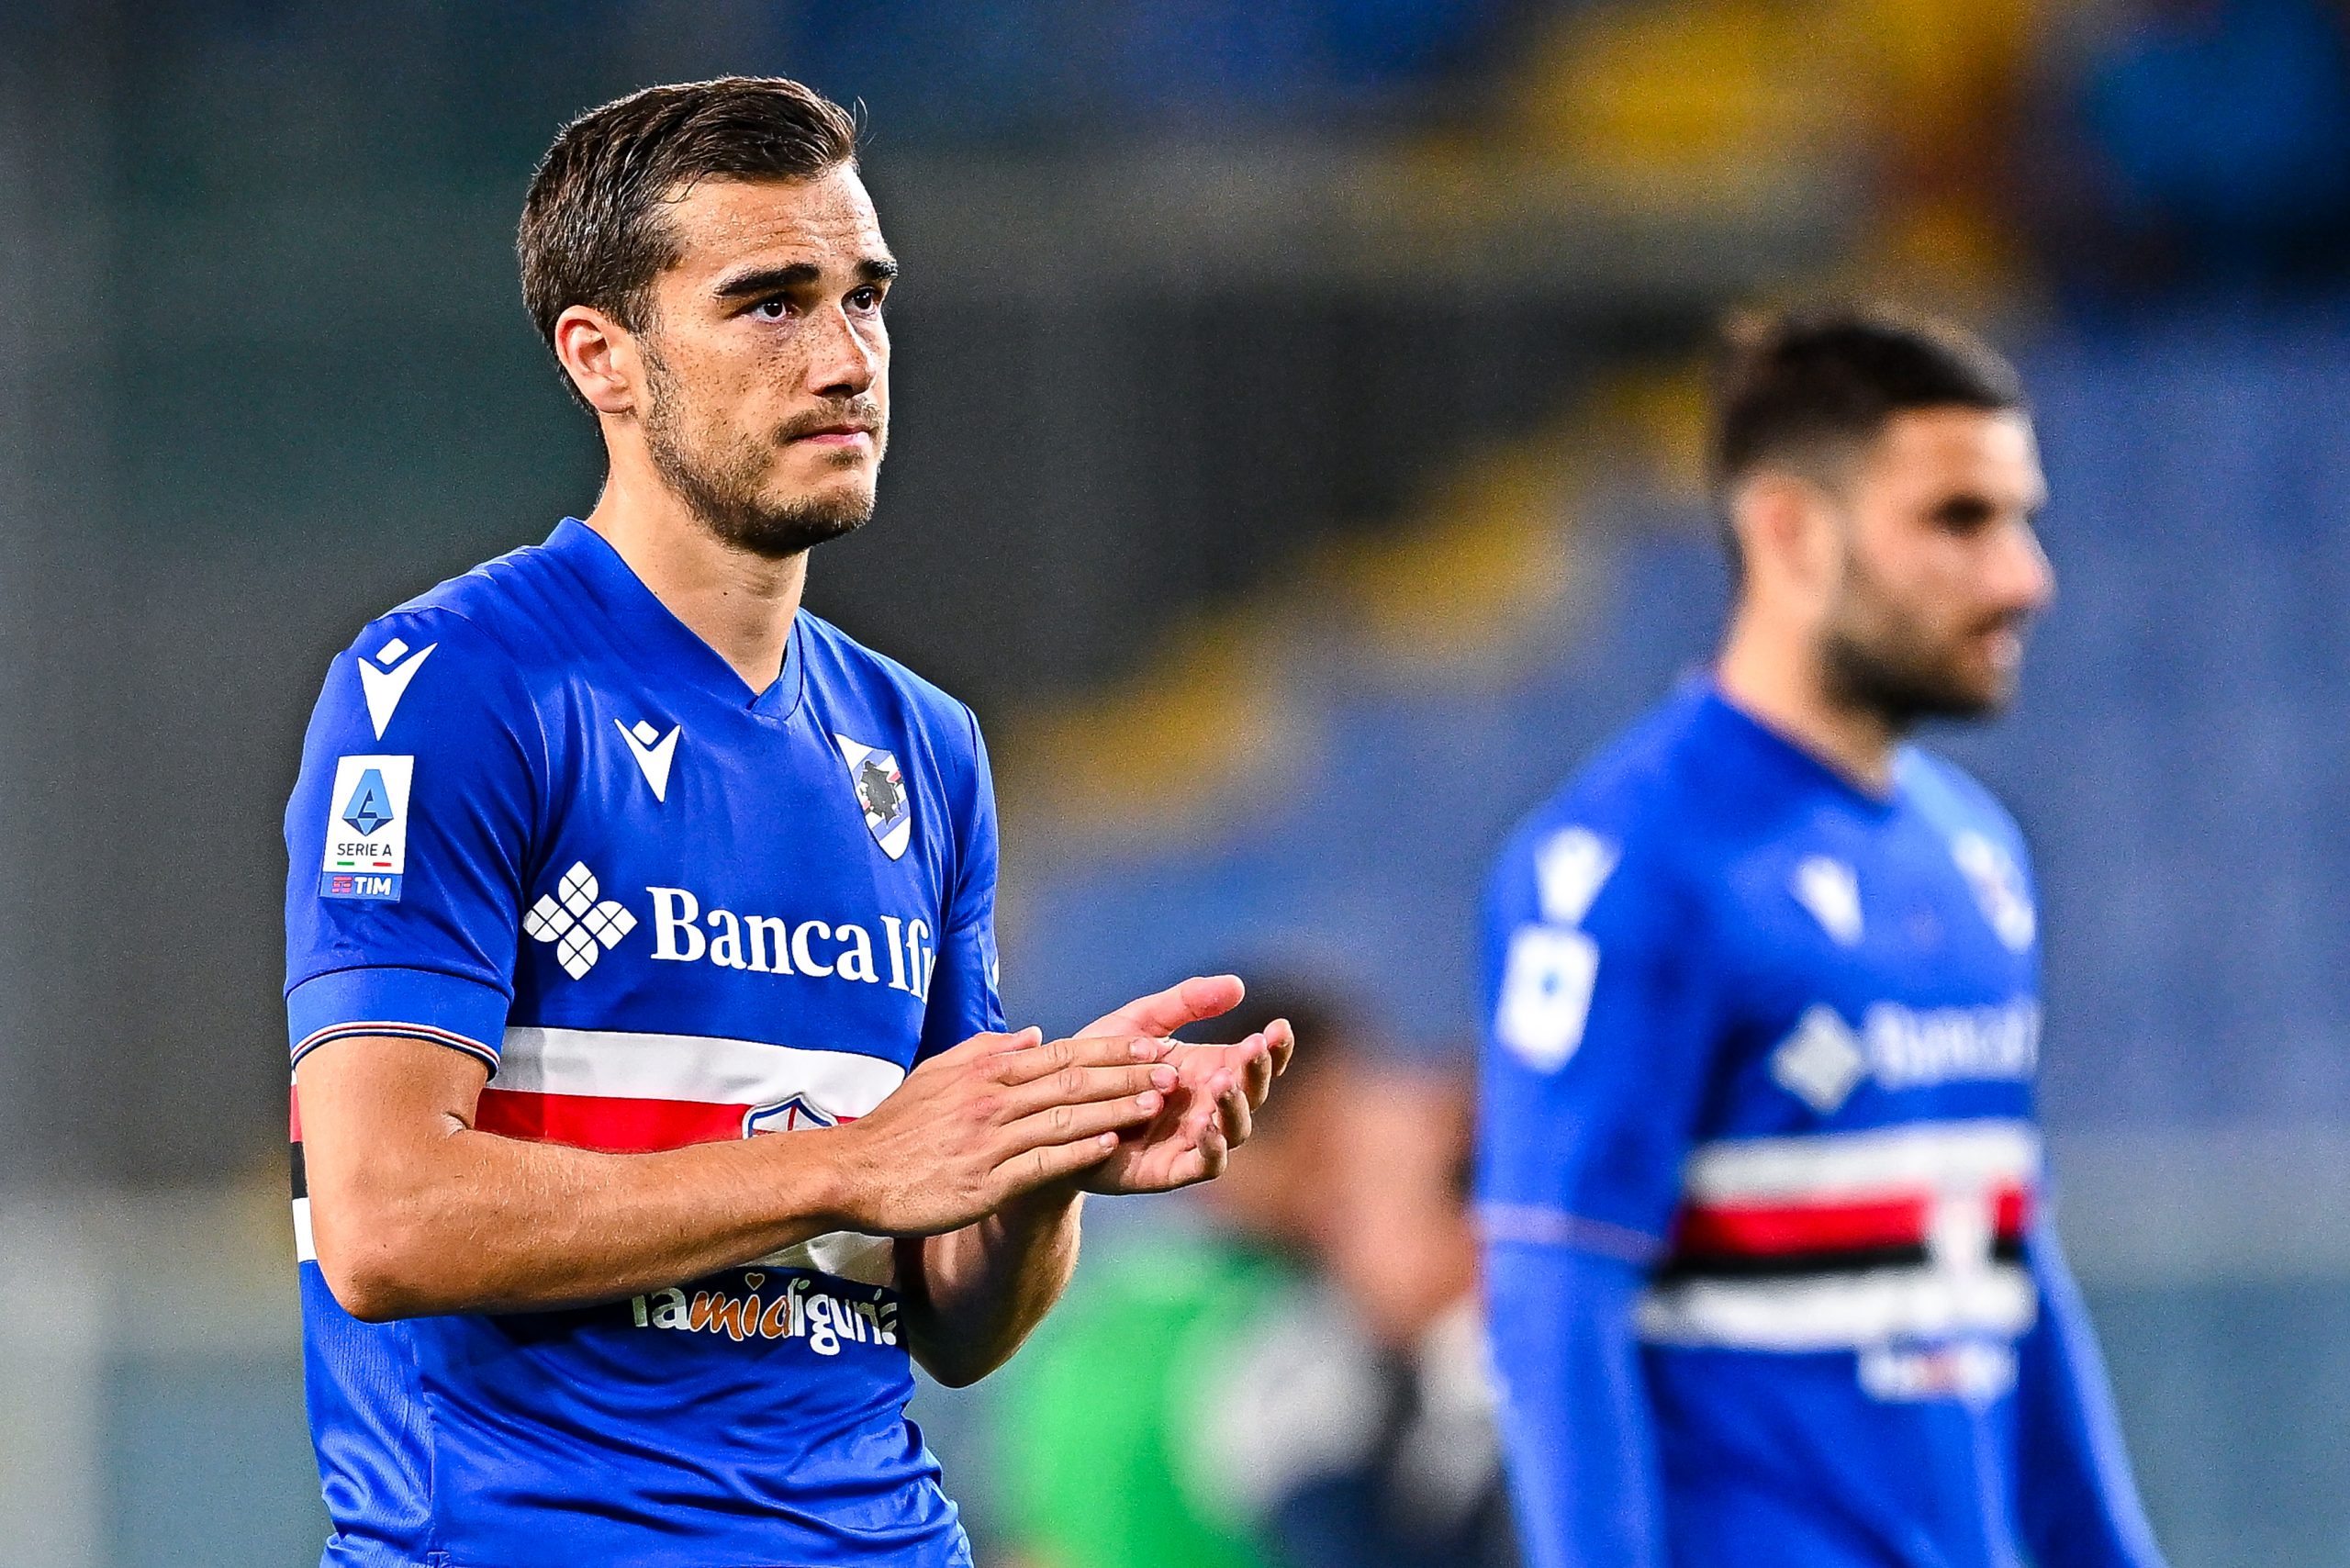 Harry Winks of Tottenham Hotspur during his time at Sampdoria. (Photo by Simone Arveda/Getty Images)